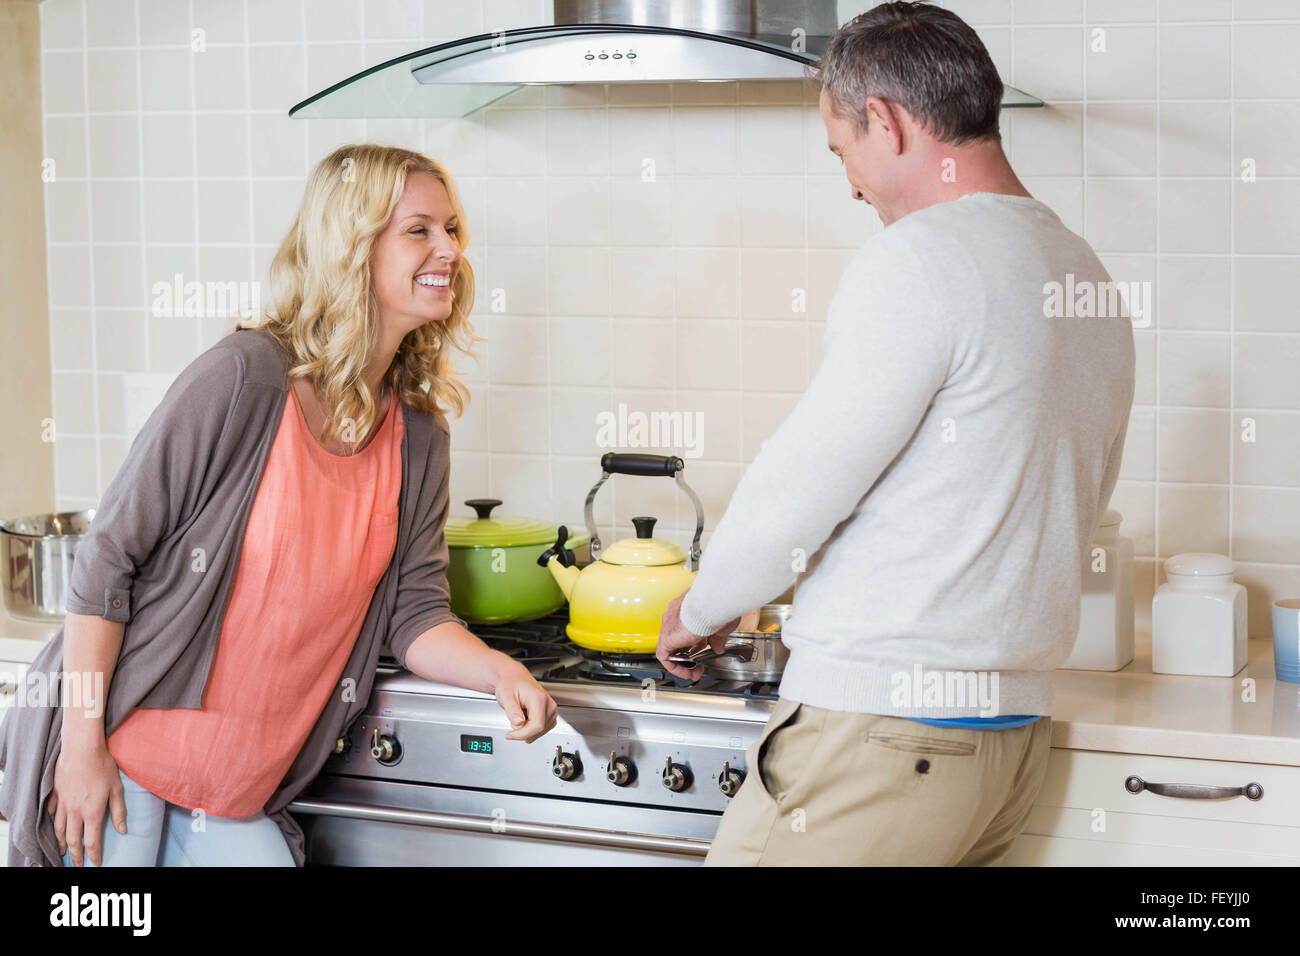 Cute couple using copper kettle Stock Photo